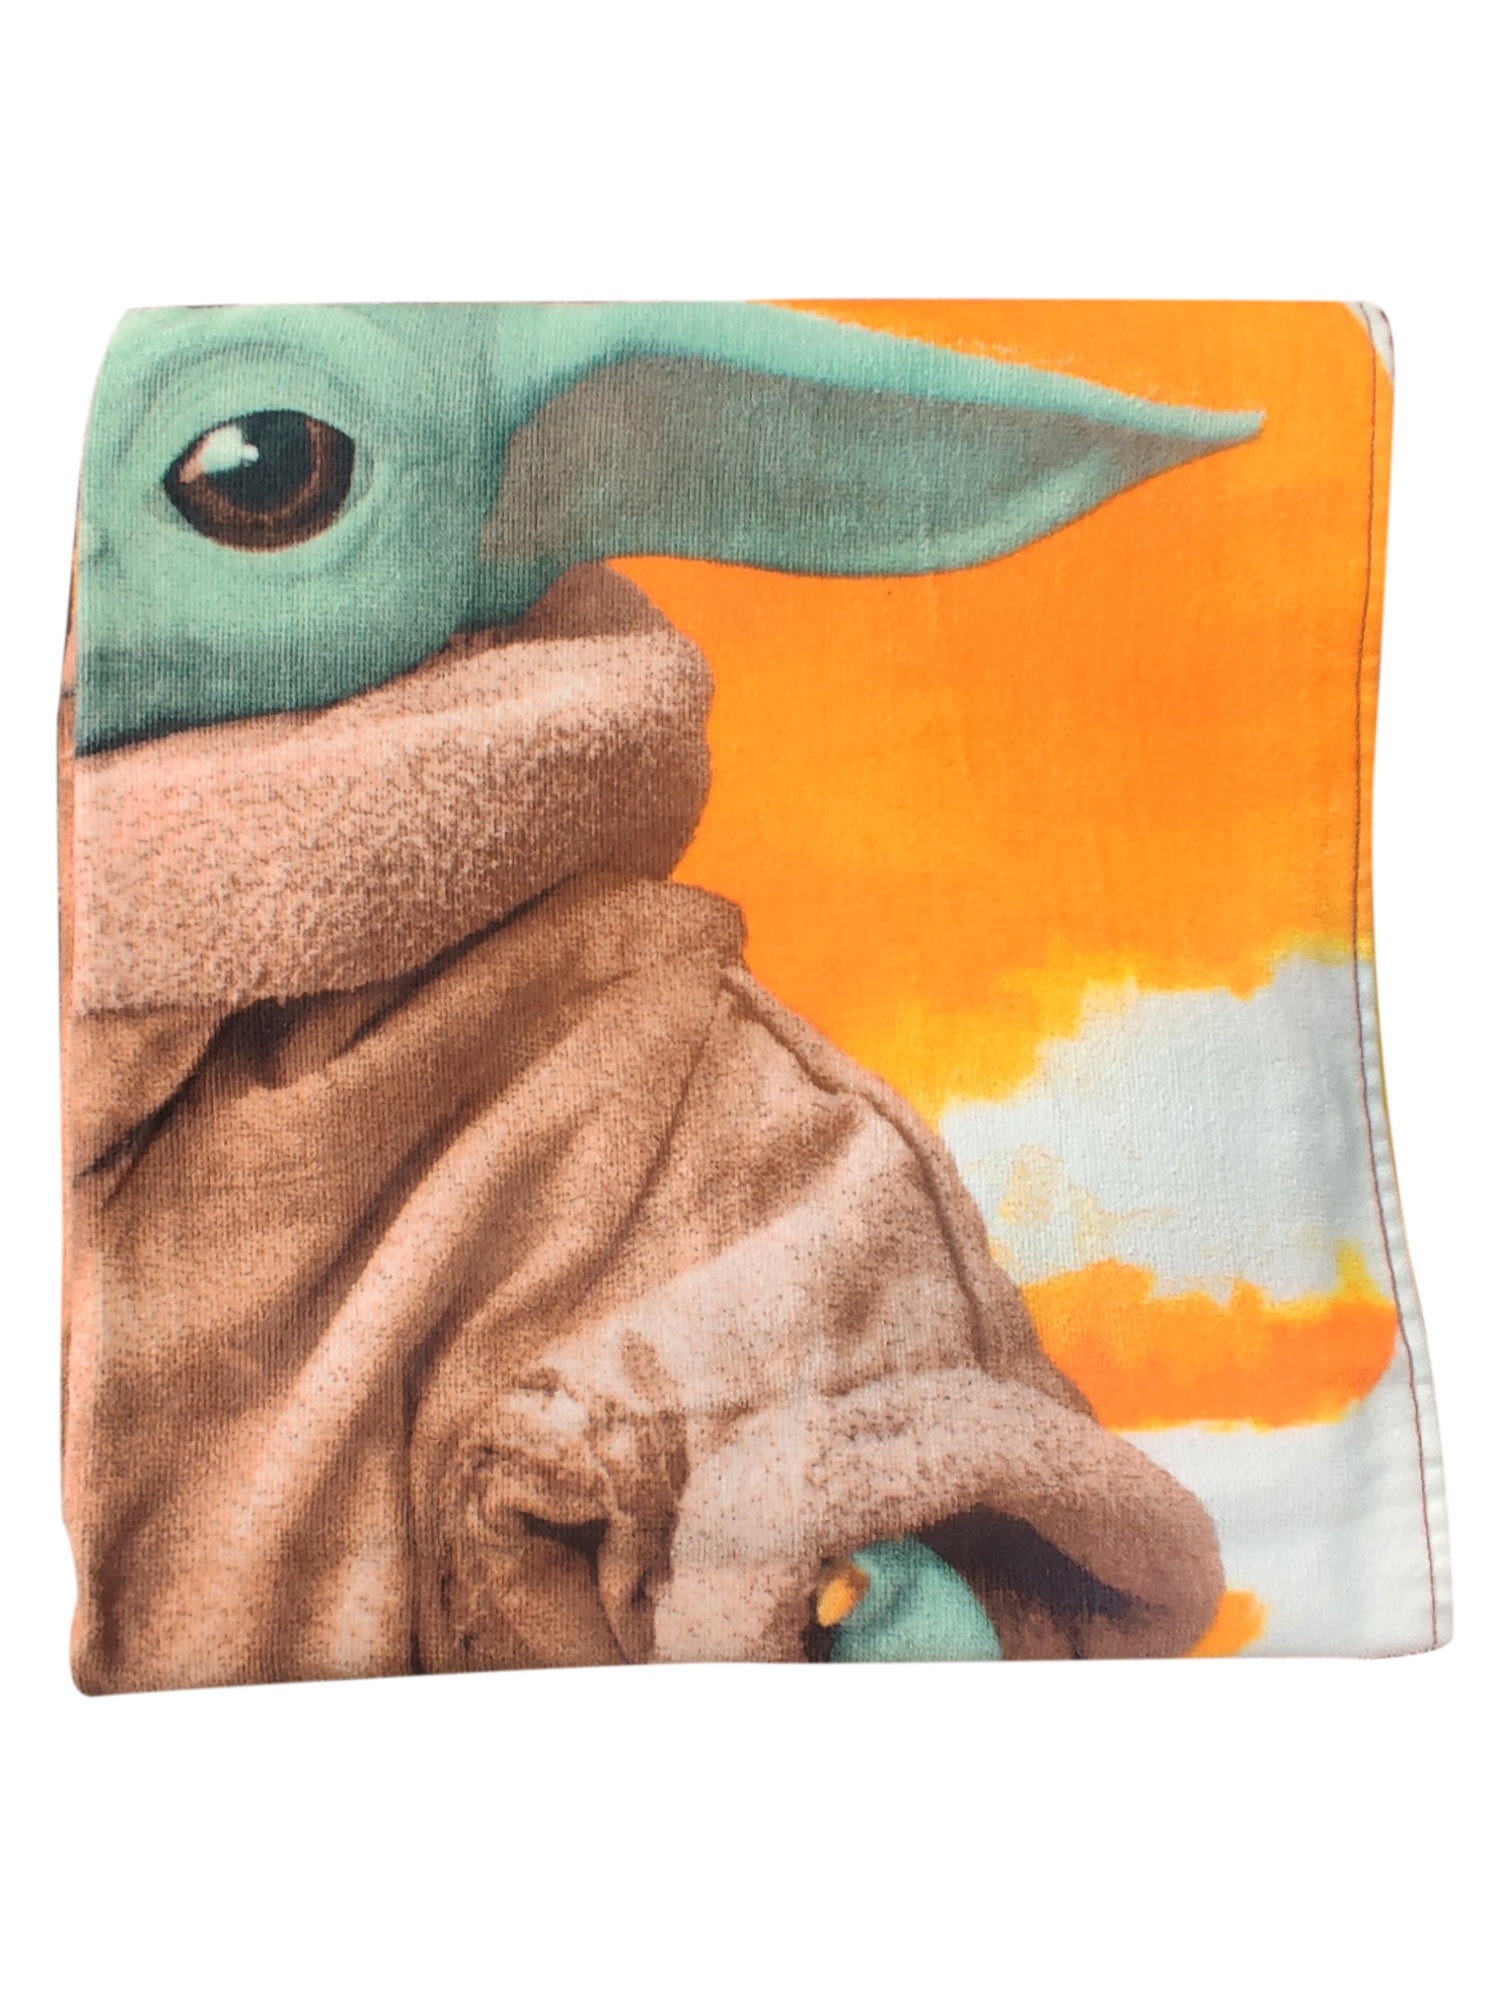 WellWellWell baby groot and baby yoda Beach Towels Fashion Pool Towell for Sun Bath for Kids Adult white 150x75 cm